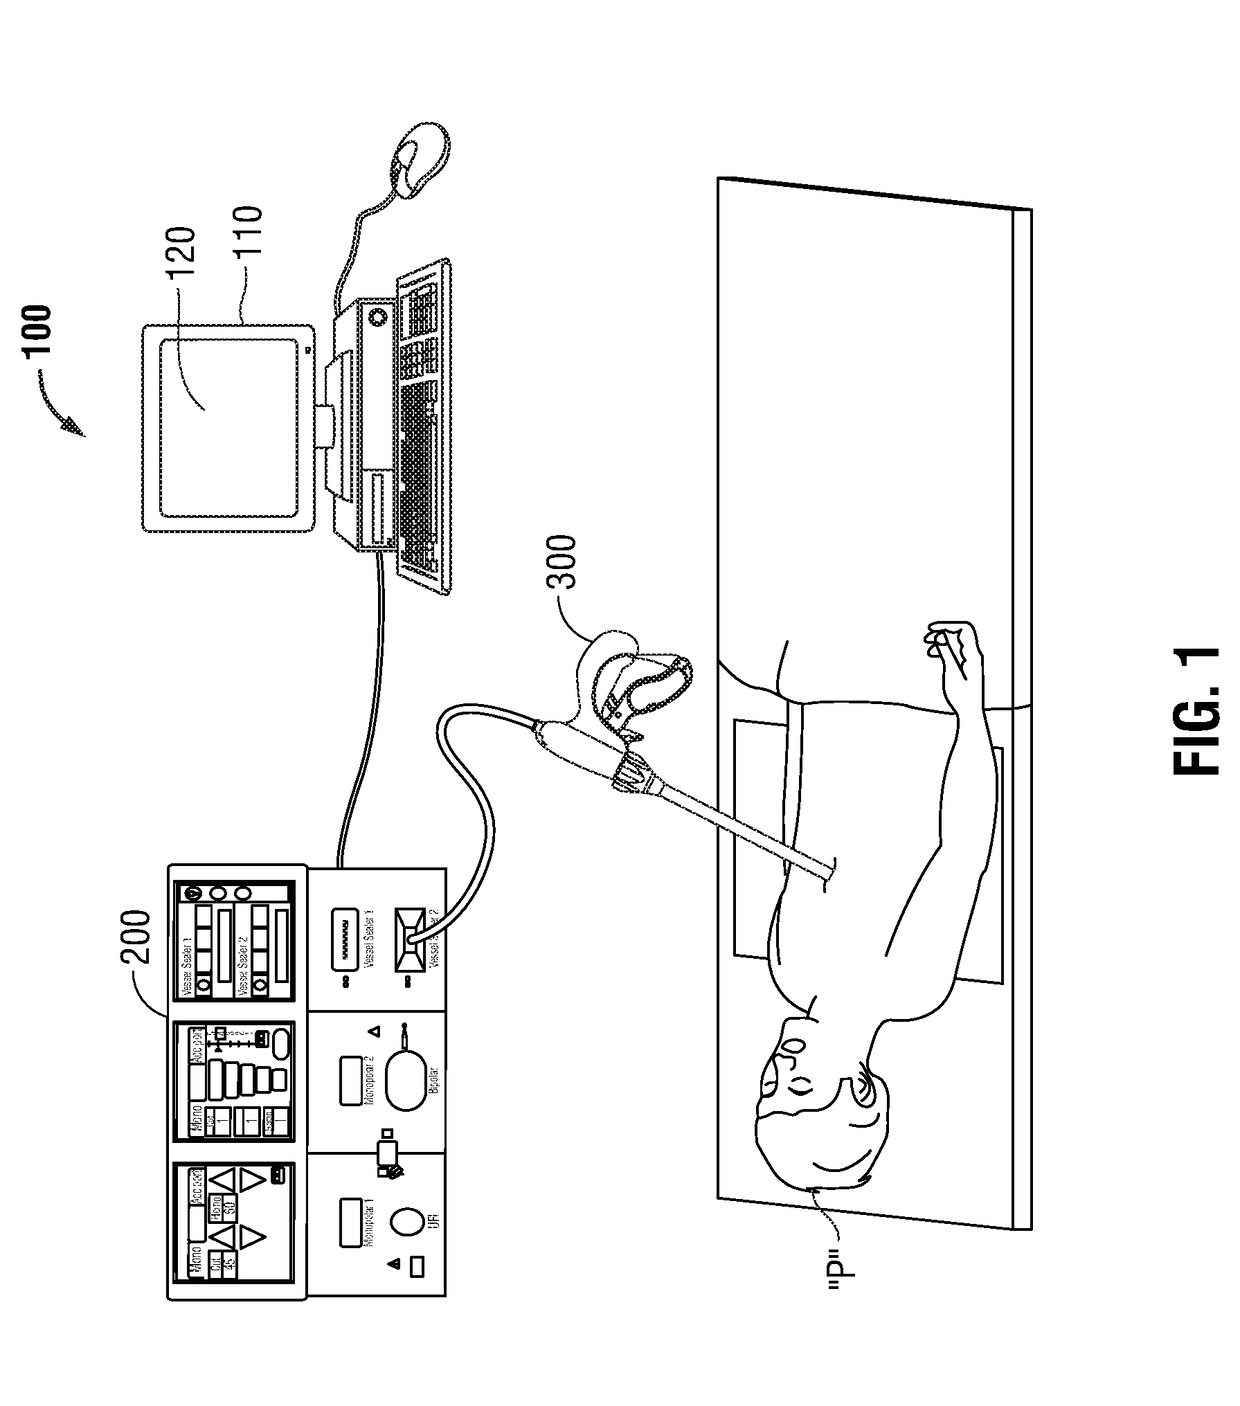 Systems and methods of tracking and analyzing use of medical instruments